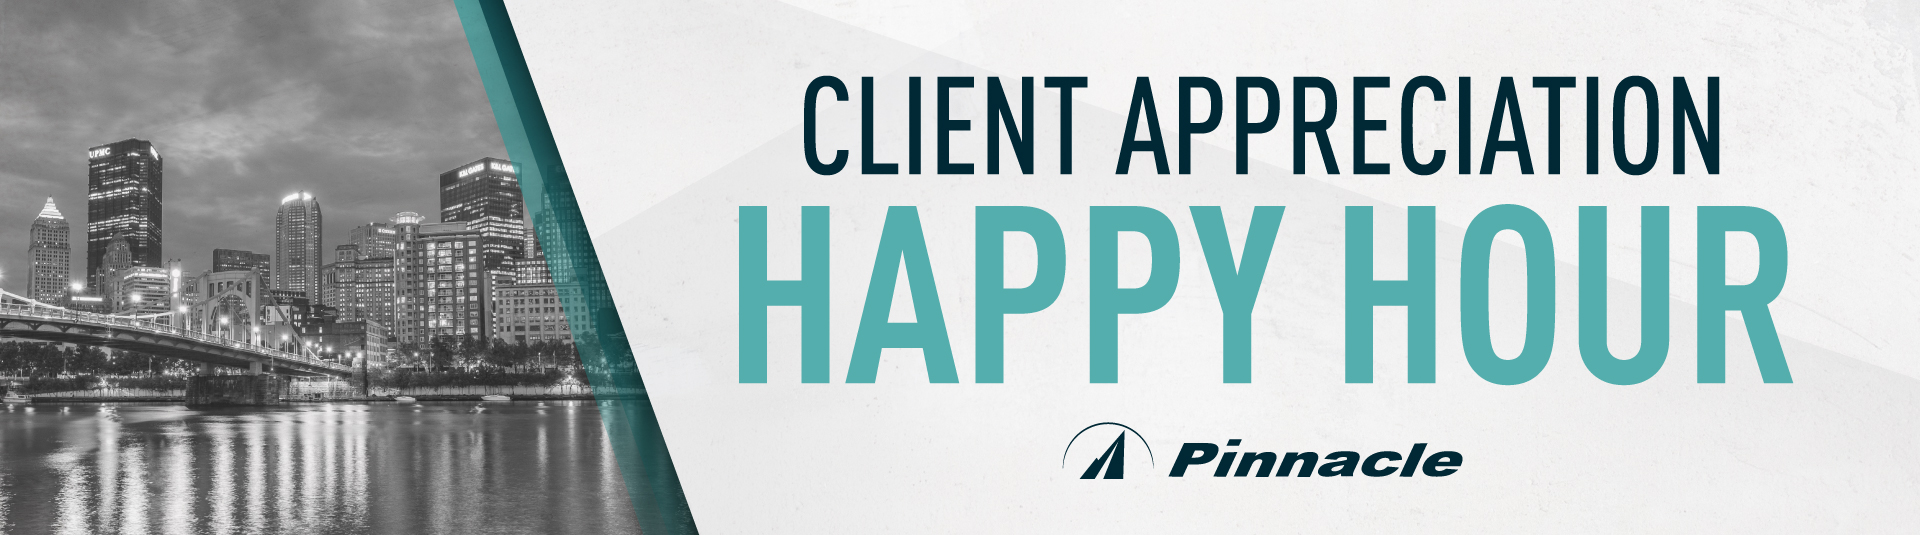 Pinnacle Consulting & Recruitment Client Appreciation Happy Hour Banner